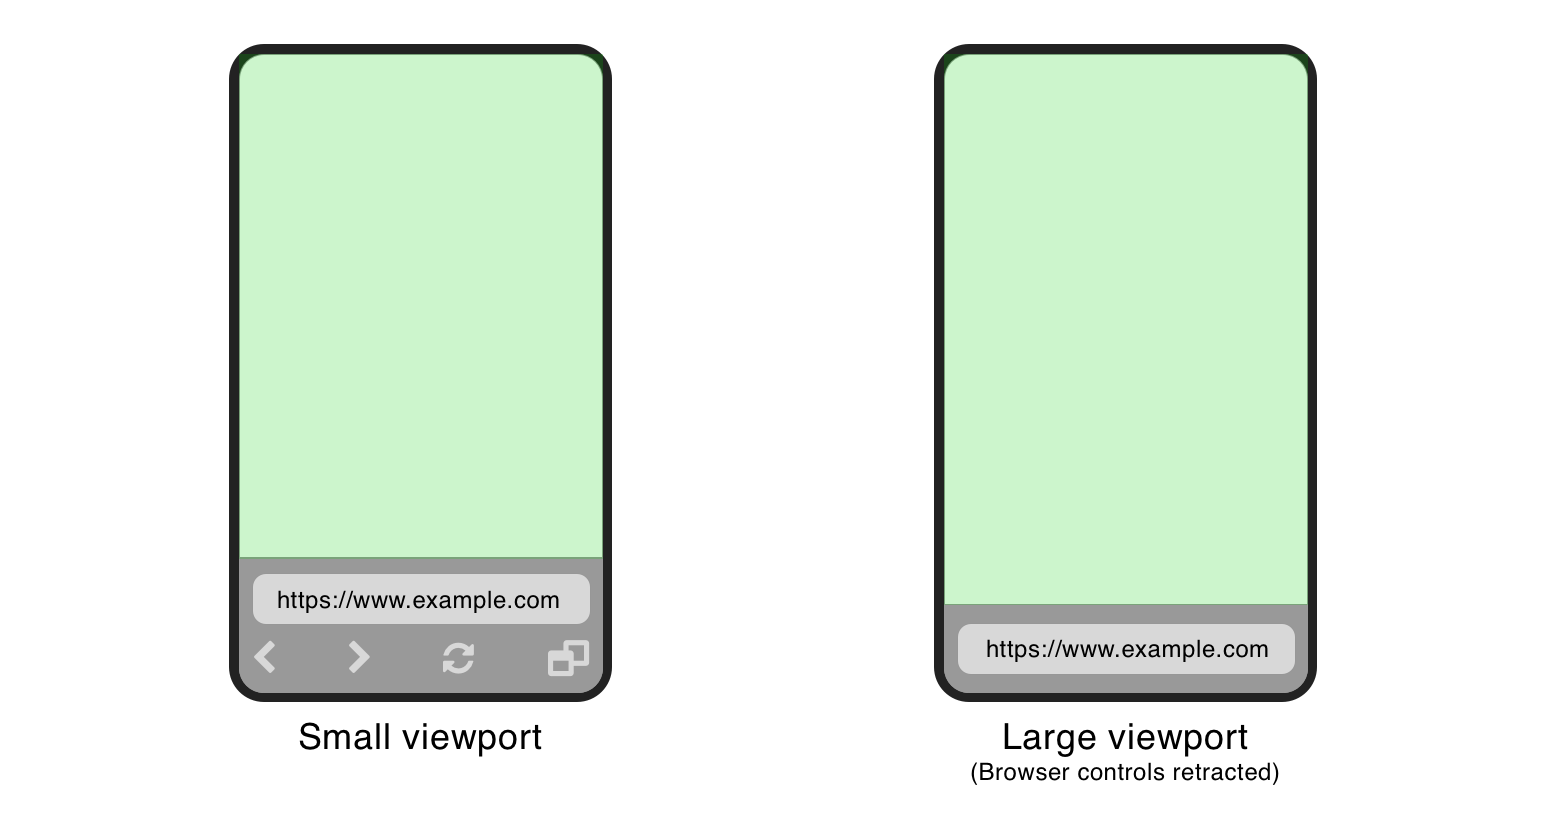 Large viewport units include the portion of the browser window occupied by the browser's user interface. Small viewport units exclude the browser's user interface